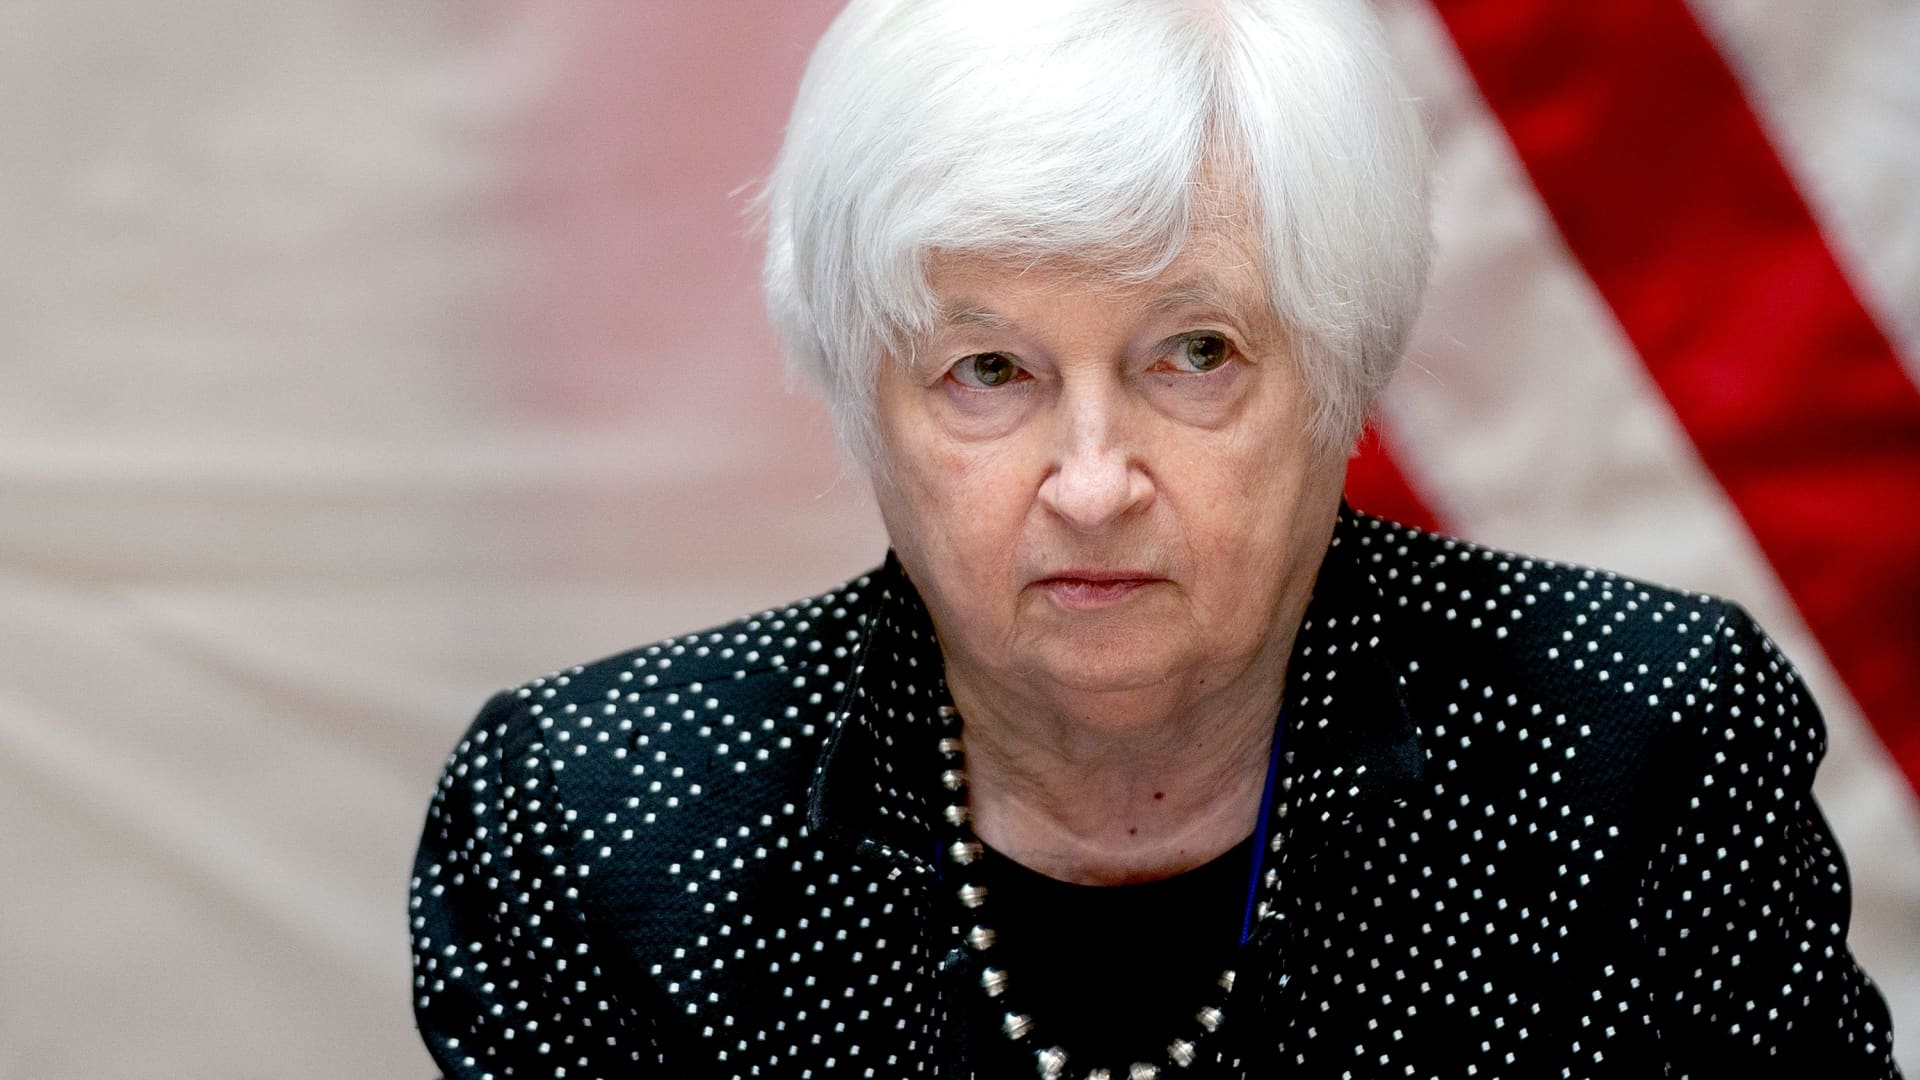 The U.S. could hit the debt ceiling by June 1, much sooner than expected, Yellen warns